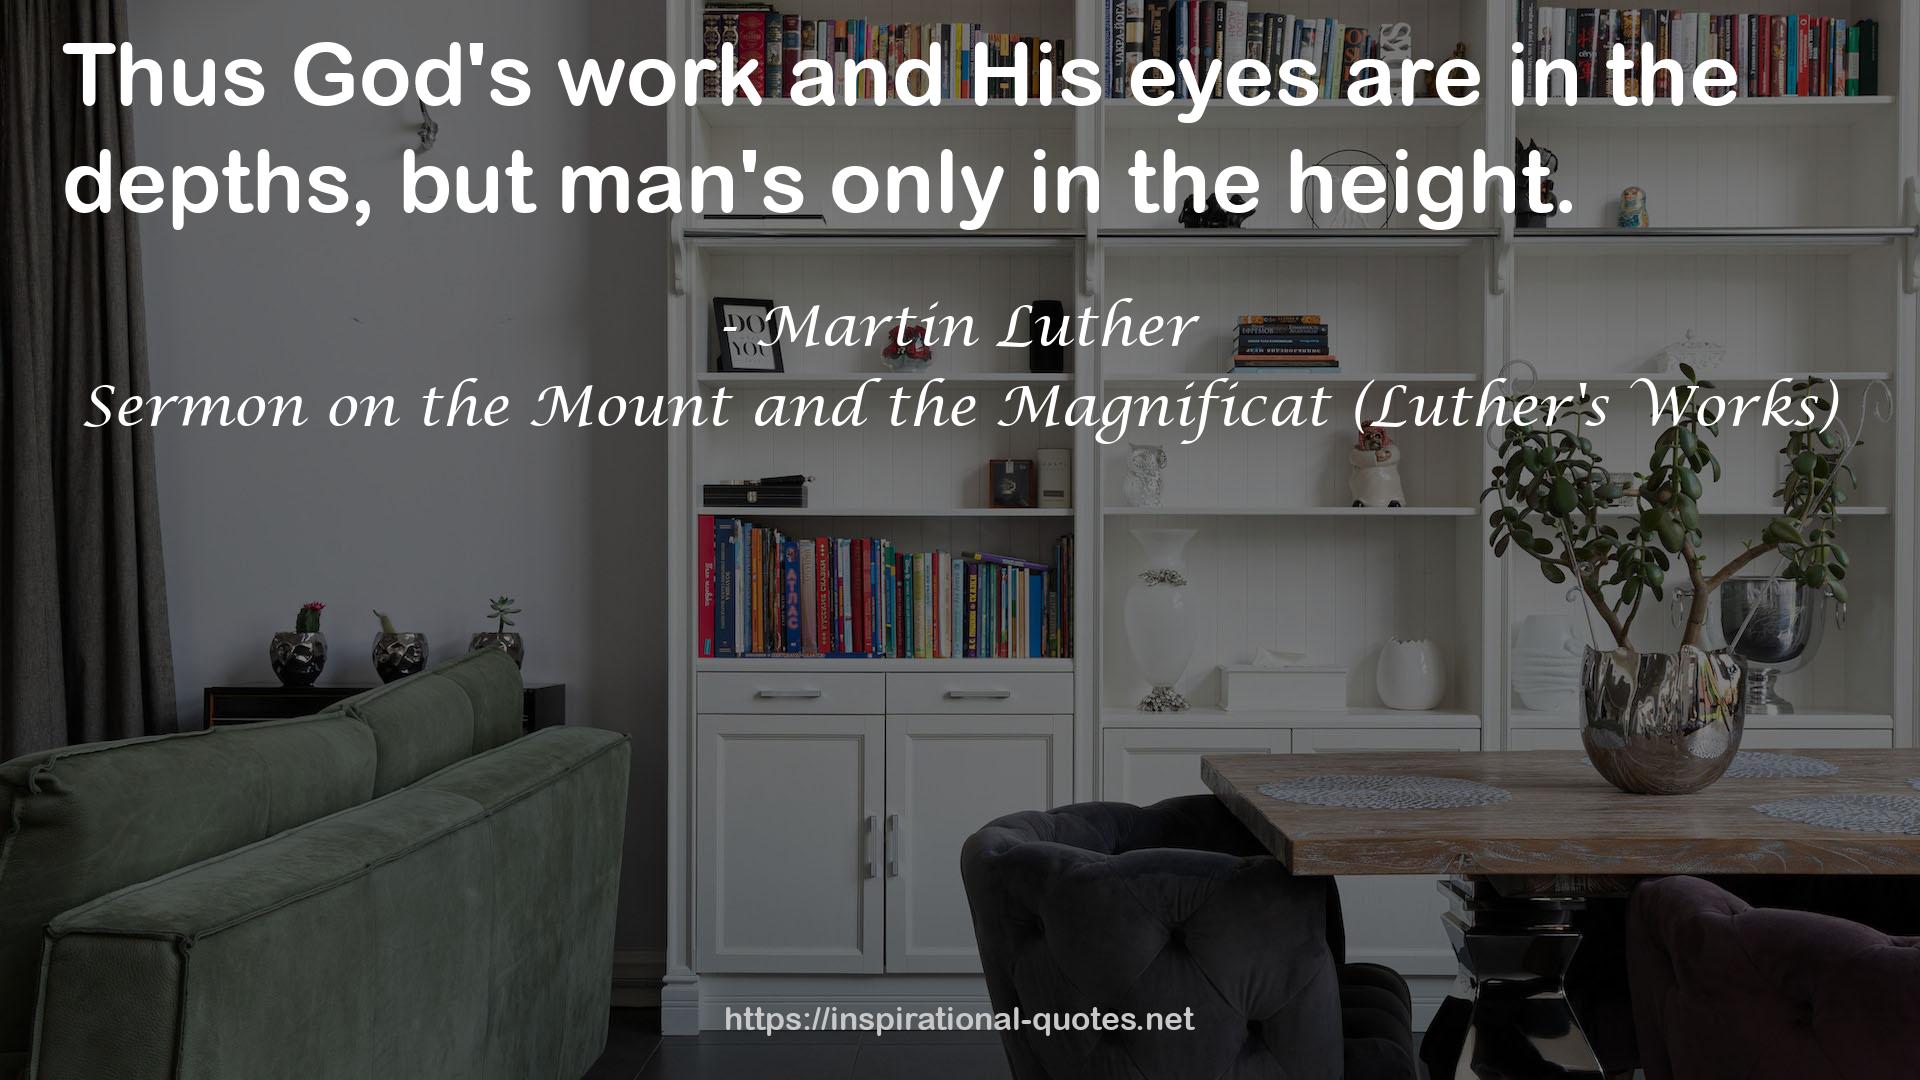 Sermon on the Mount and the Magnificat (Luther's Works) QUOTES